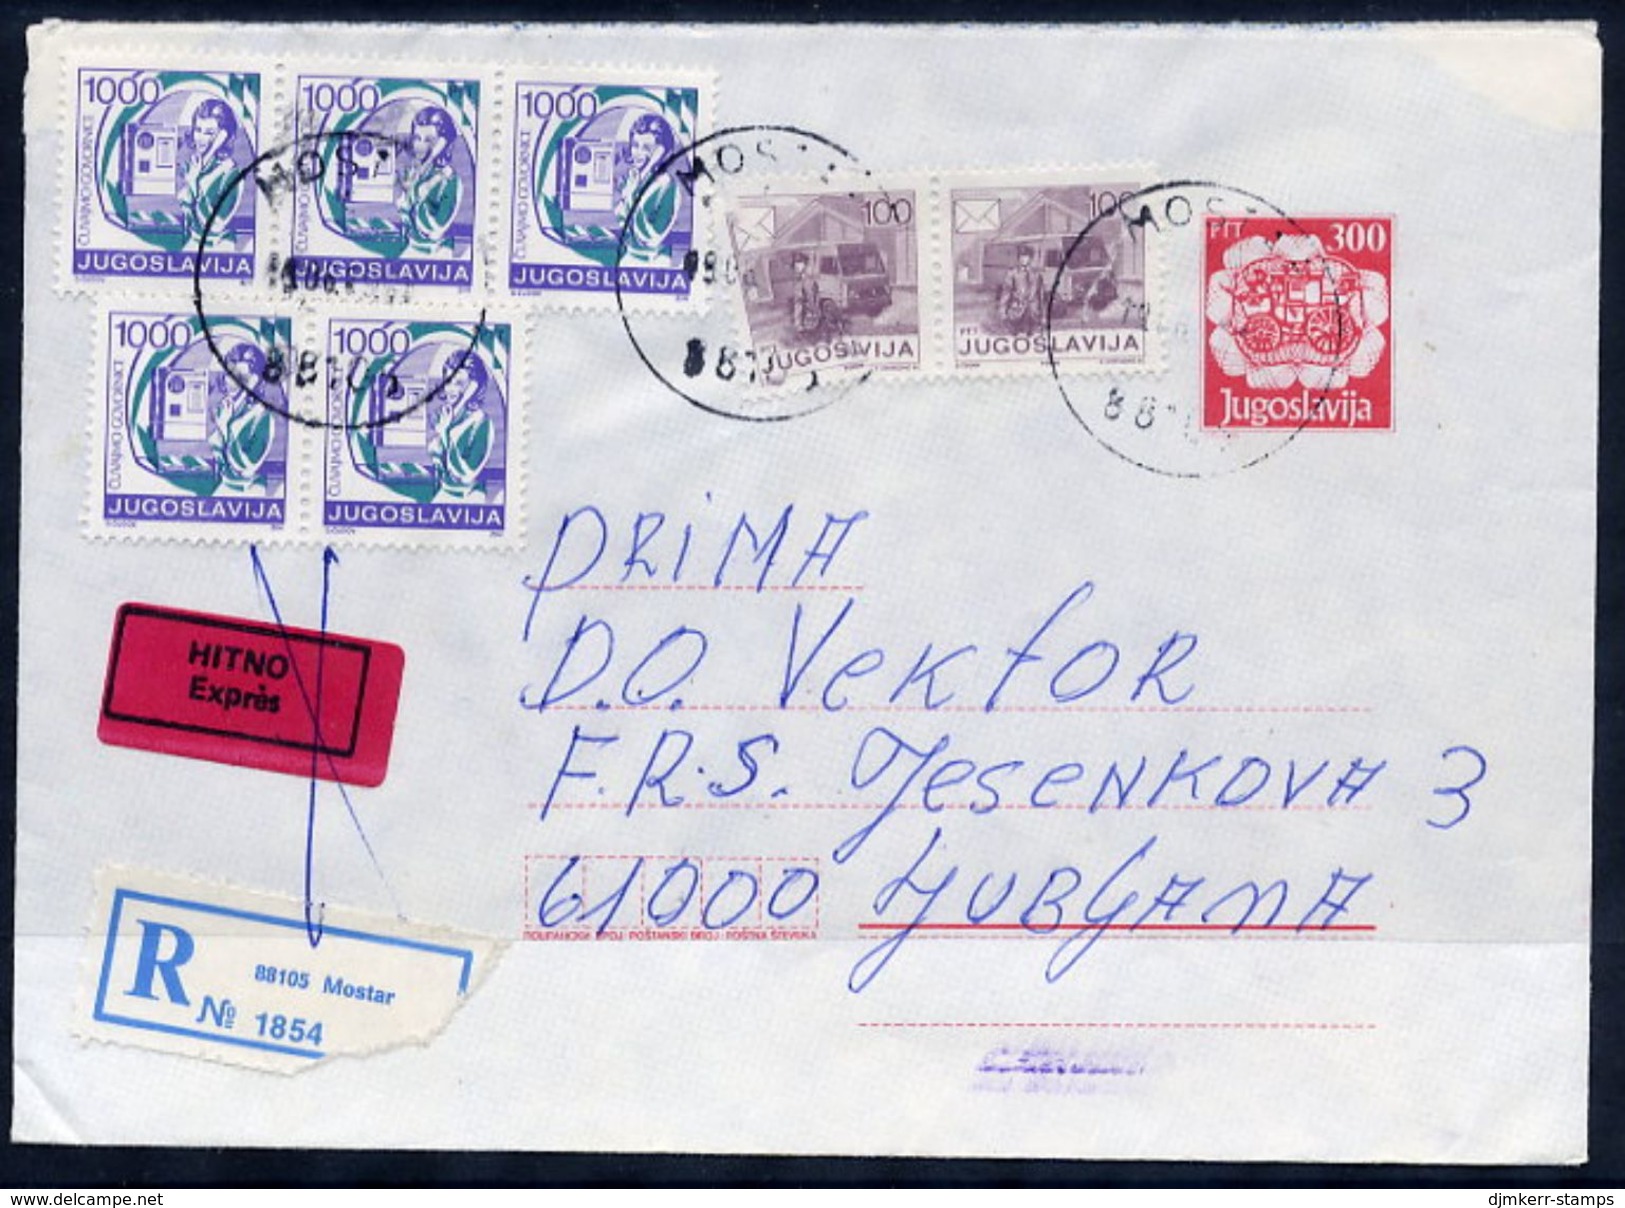 YUGOSLAVIA 1989 Mailcoach 300 D.envelope Used With Additional Franking And Express Label (Croatian).  Michel U89 - Postal Stationery